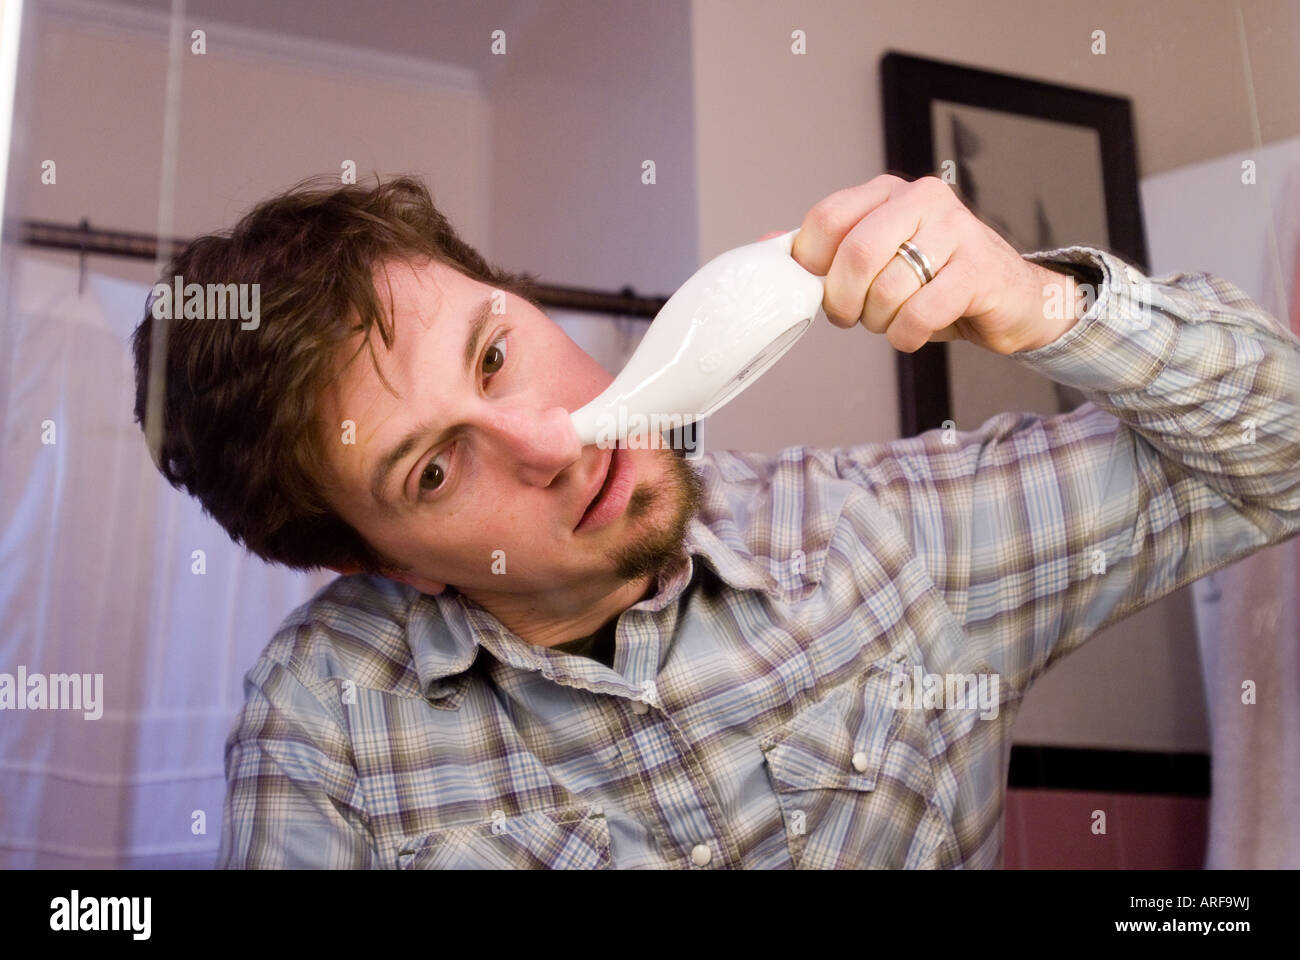 Neti Pot user to help clear sinuses Stock Photo